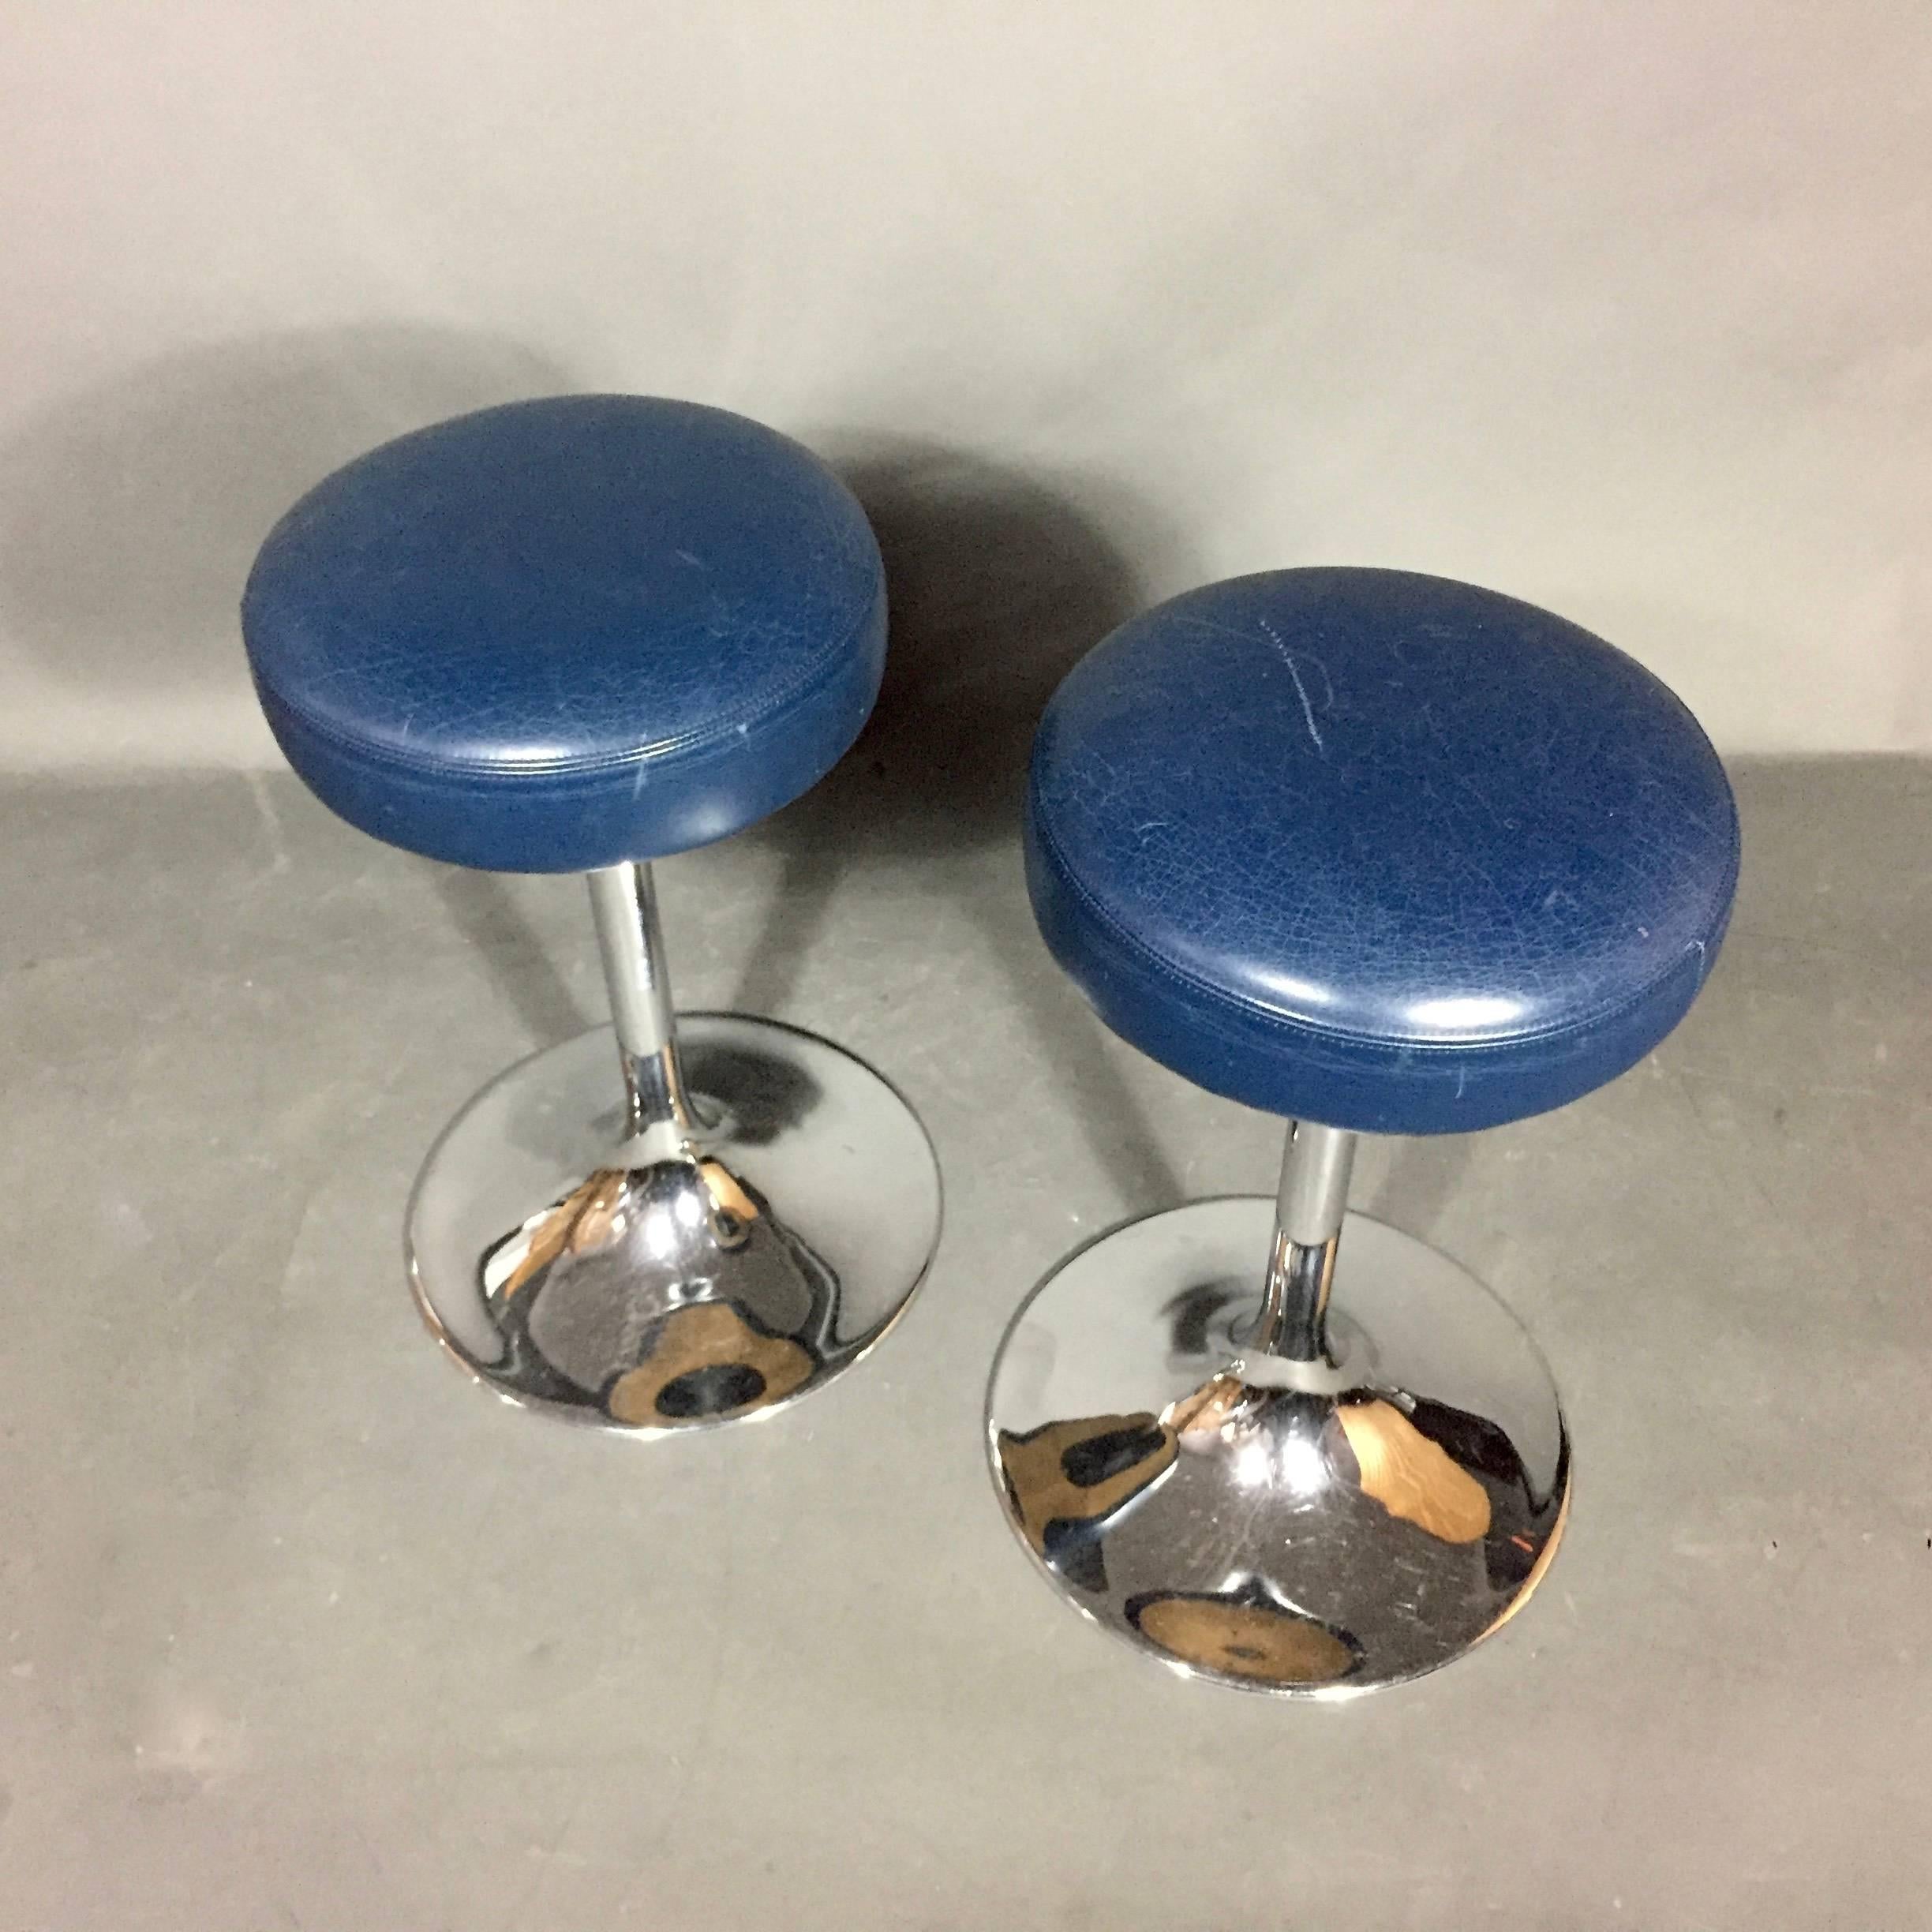 Scandinavian Modern Pair of Johanson Design Chrome and Leather Stools, Sweden, 1970s For Sale